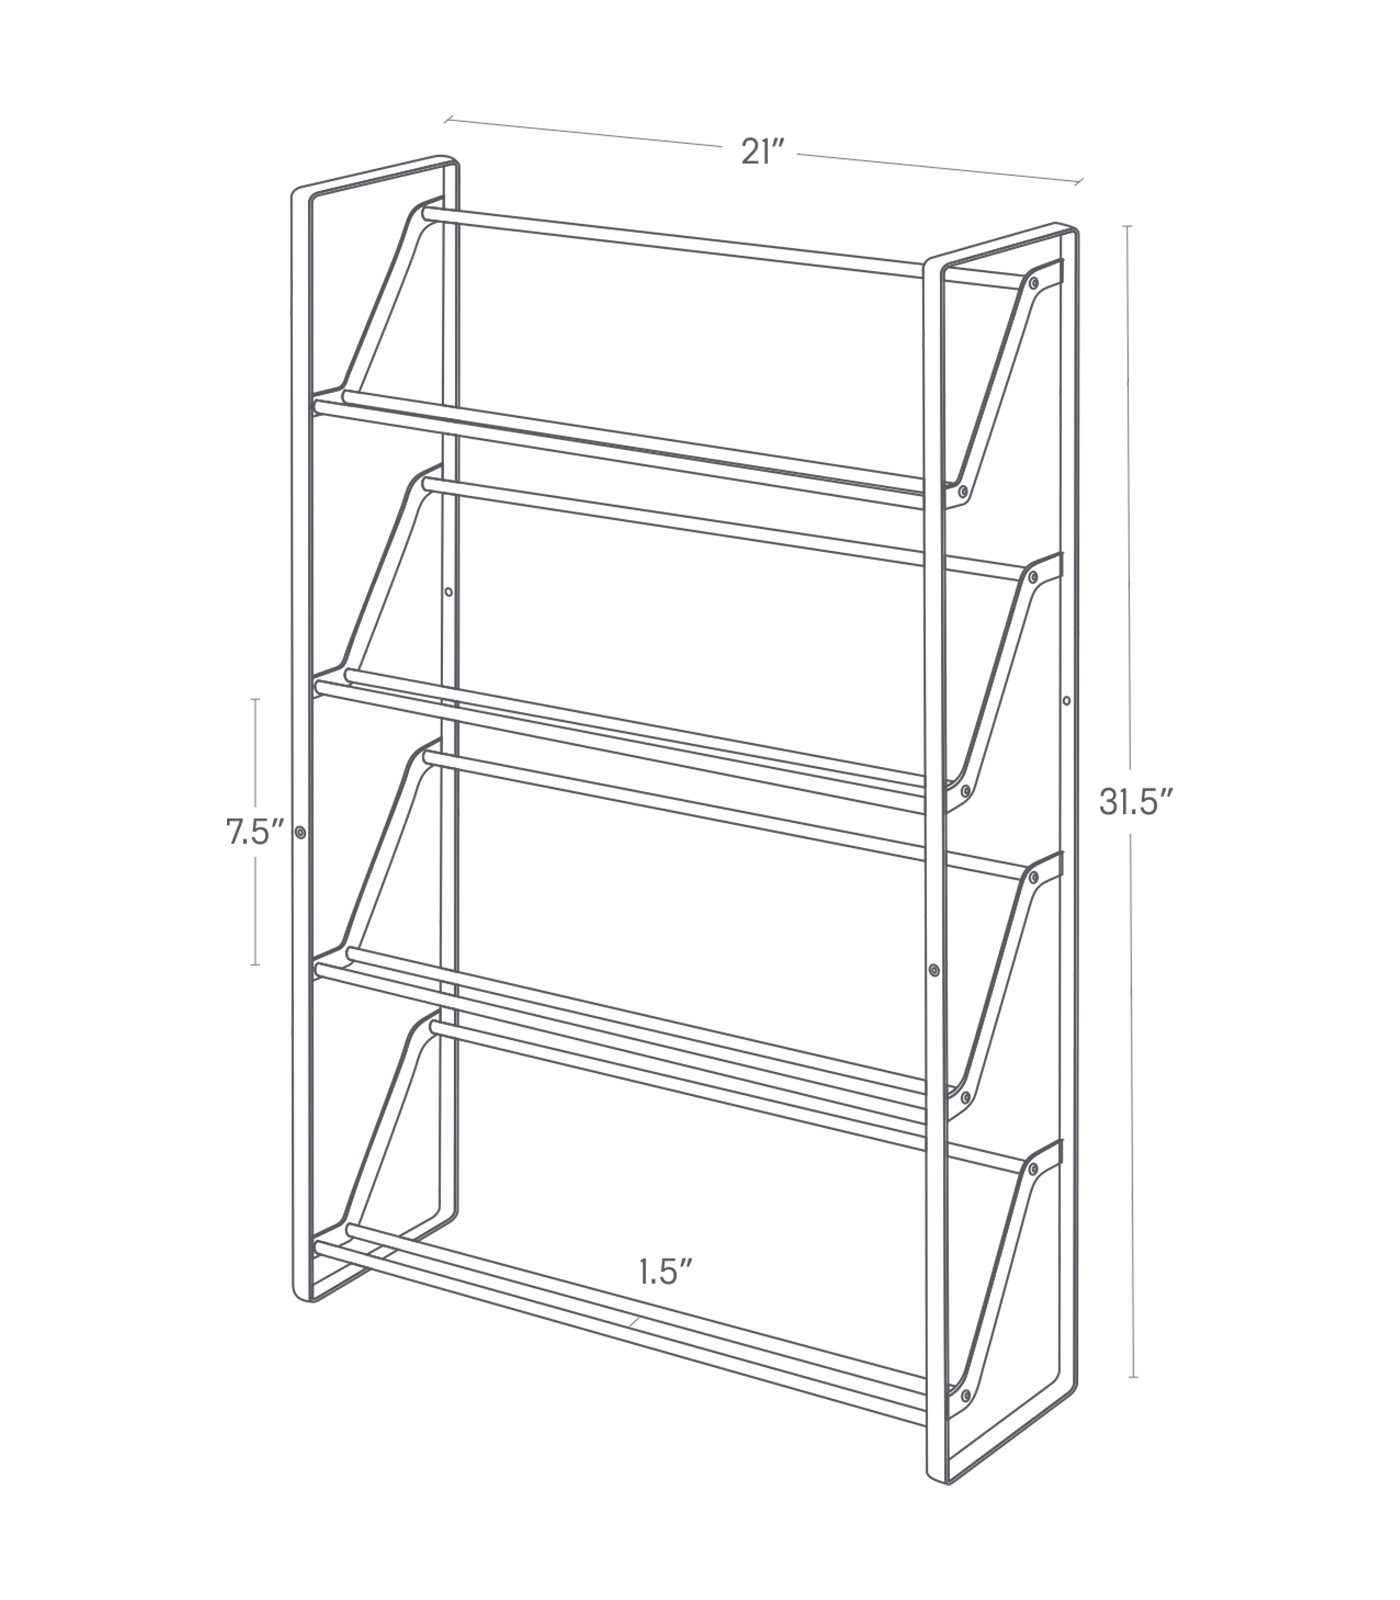 Dimension image for Slim Shoe Rack on a white background including dimensions  L 6.89 x W 20.87 x H 31.5 inches